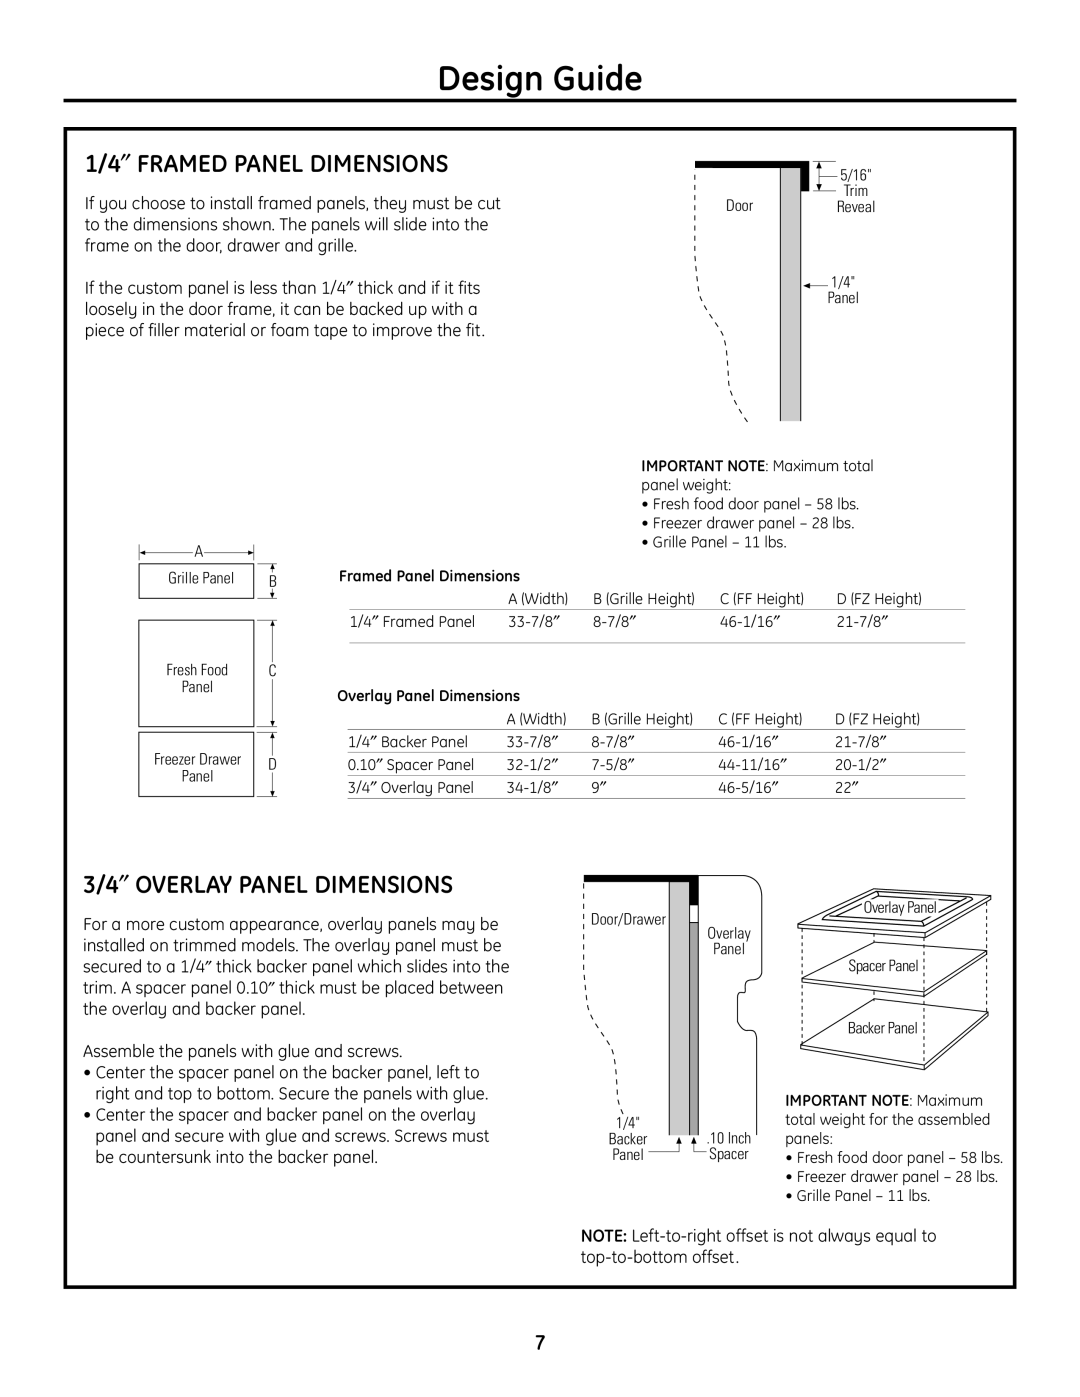 GE 49-60468-1 installation instructions 1/4″ FRAMED PANEL DIMENSIONS, 3/4″ OVERLAY PANEL DIMENSIONS, Design Guide 